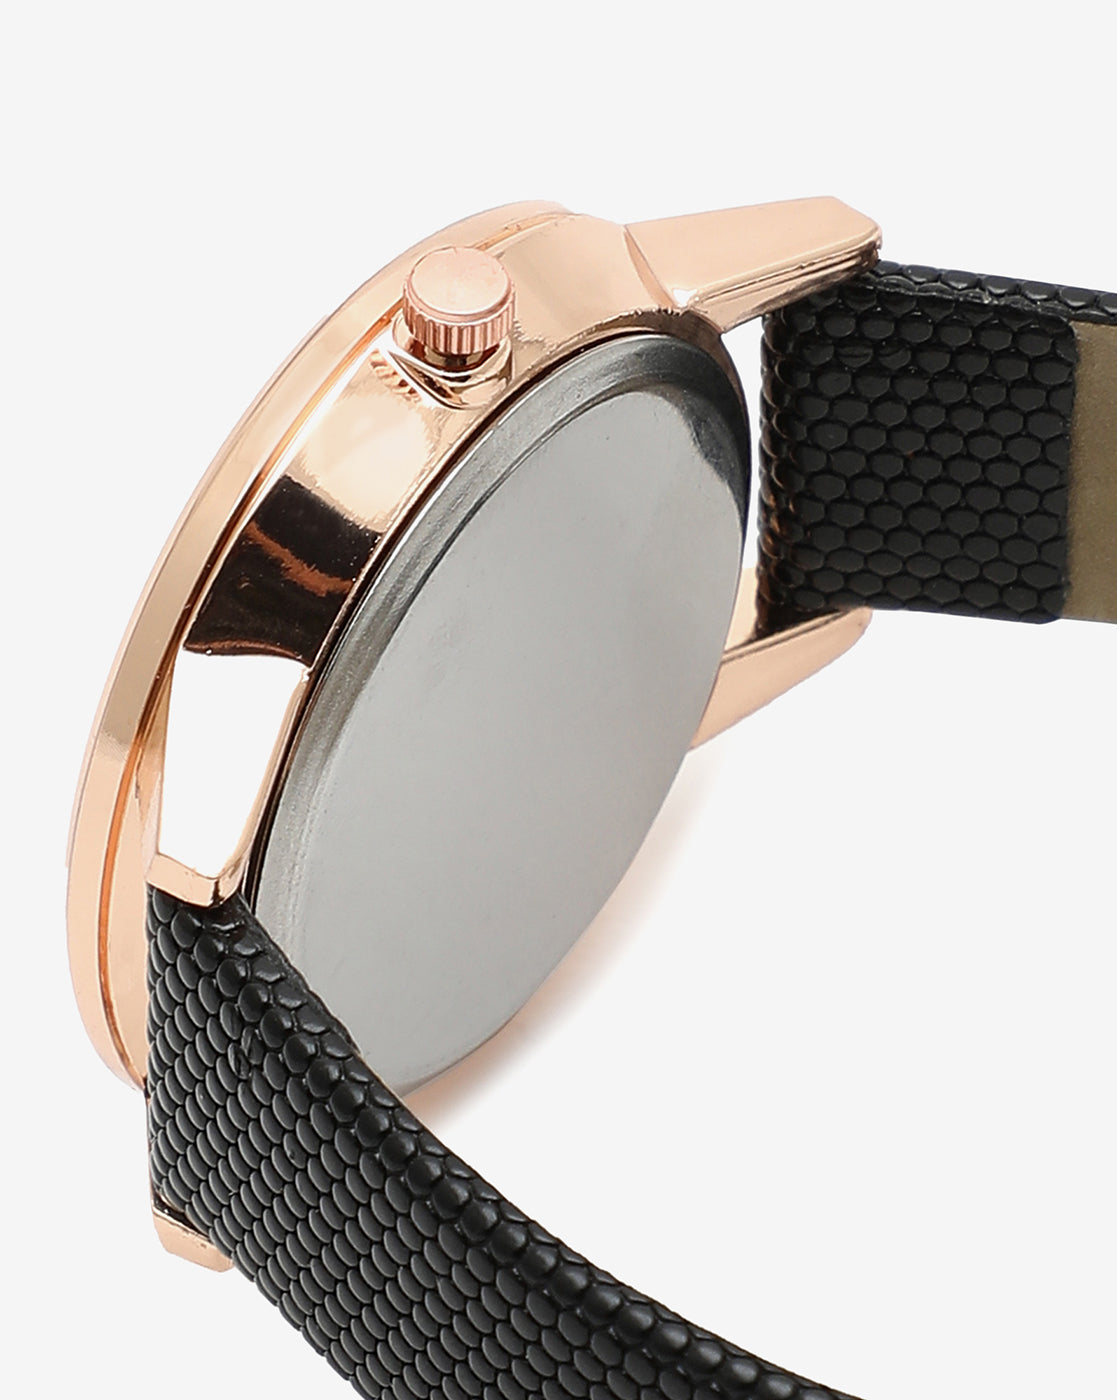 ROSE GOLD AND BLACK CRYSTAL STONE ANALOG ROUND DIAL WITH BLACK TEXTURED LEATHER STRAP